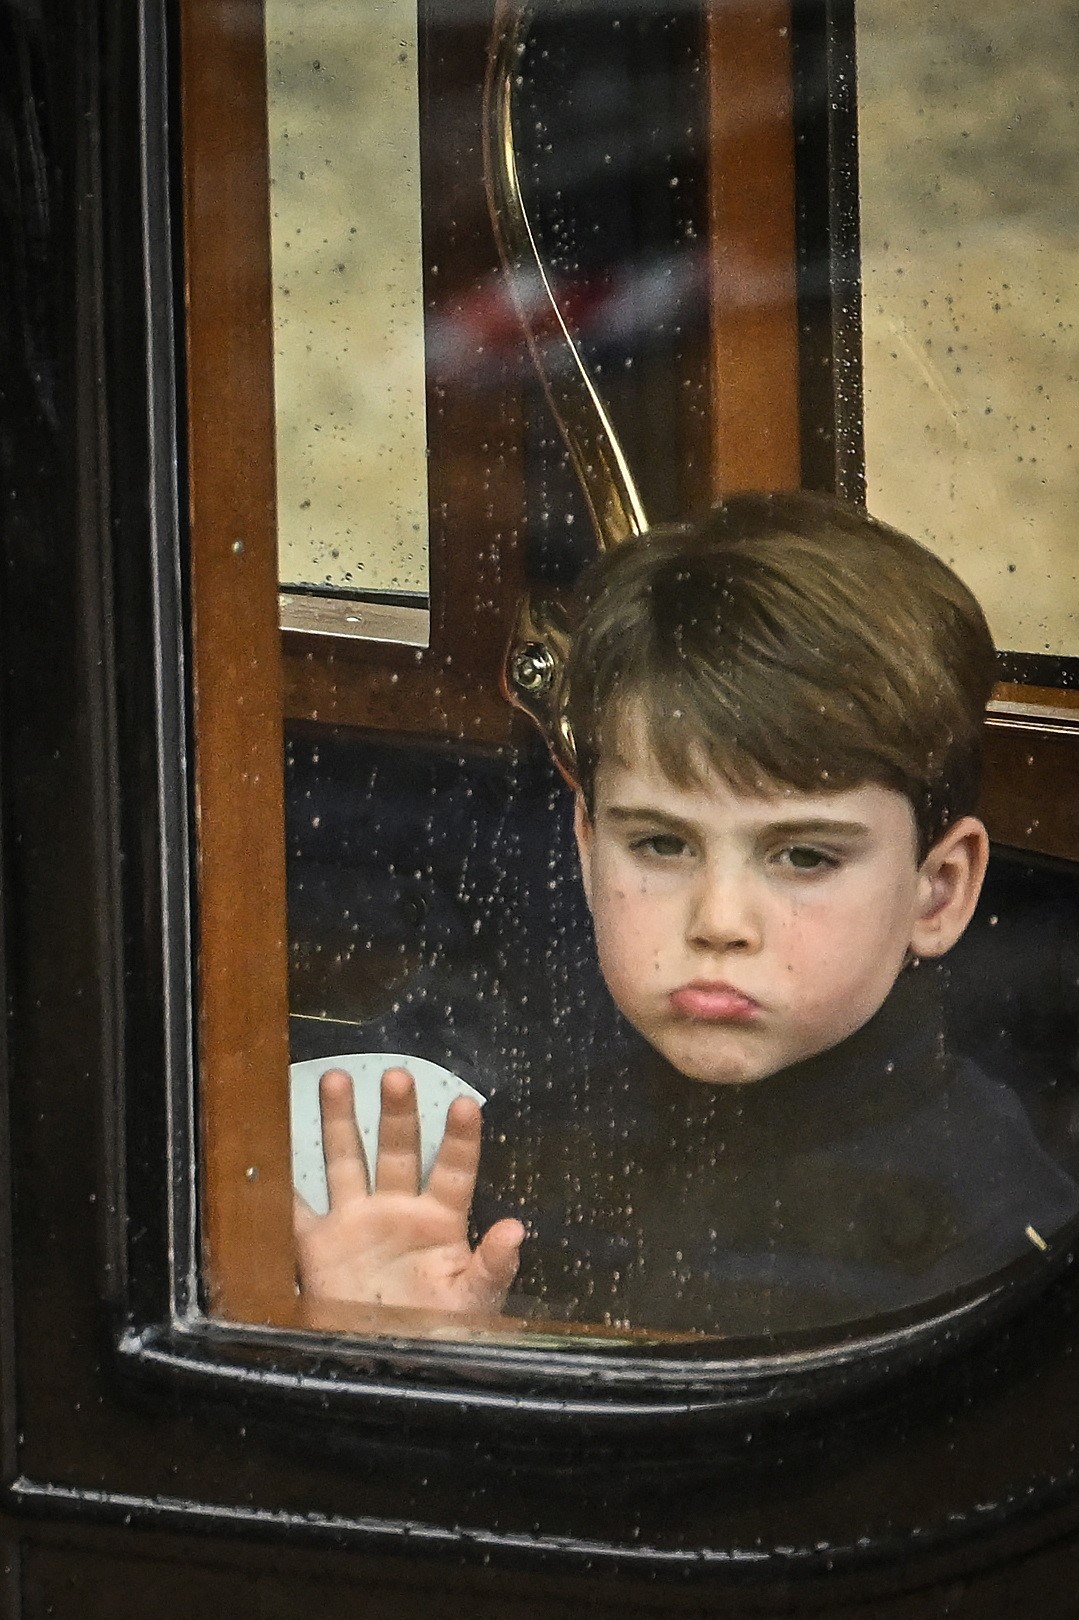 Prince Louis presses the hand to the window of the carriage